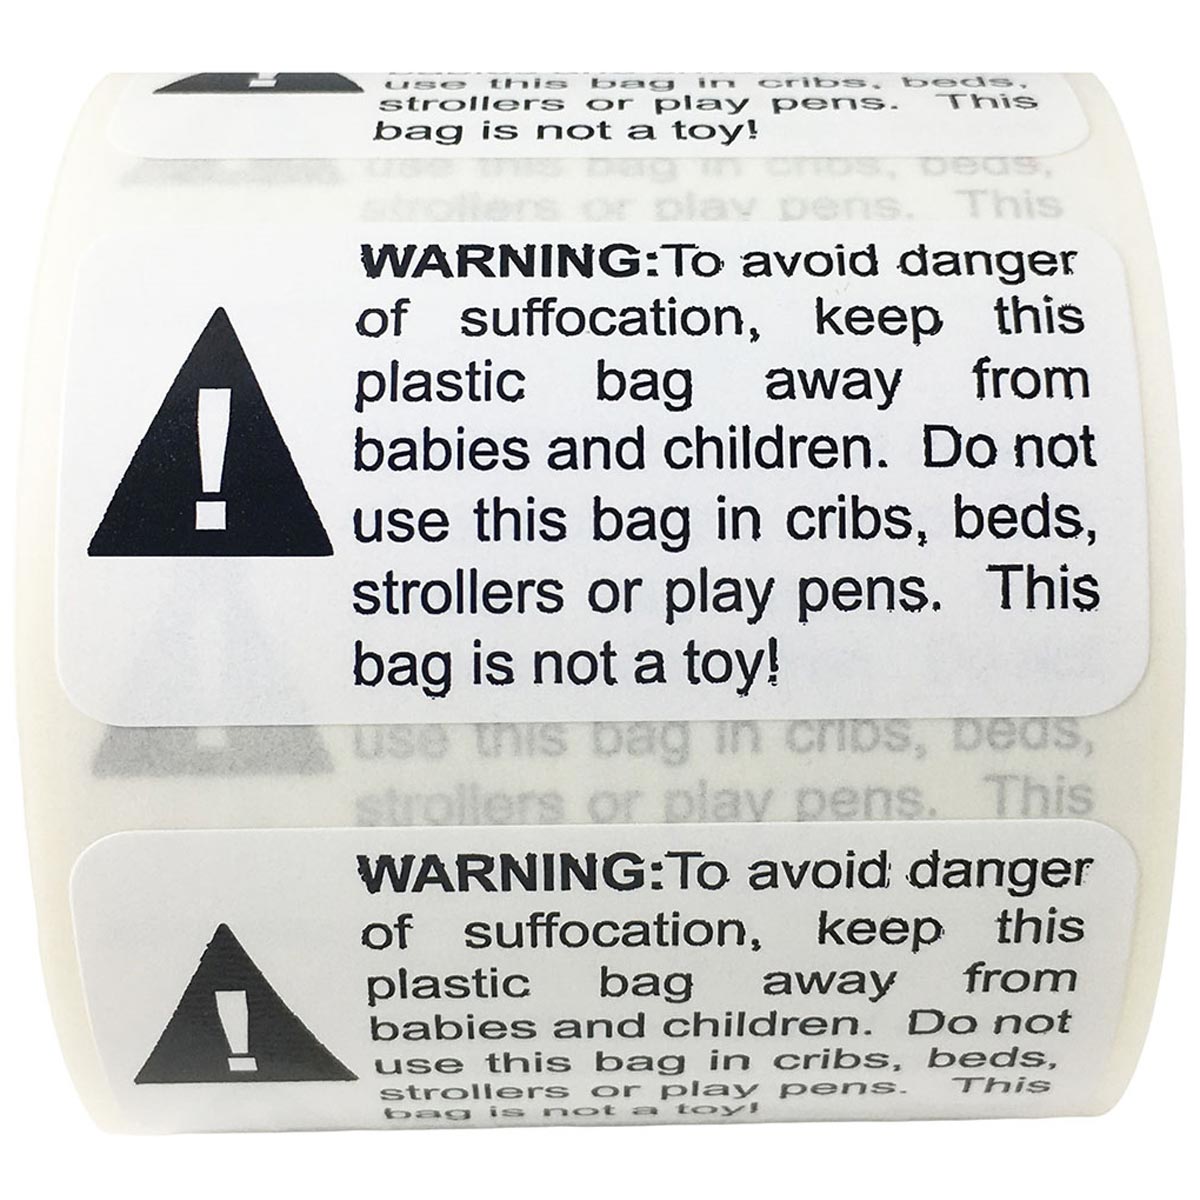 Warning on a product